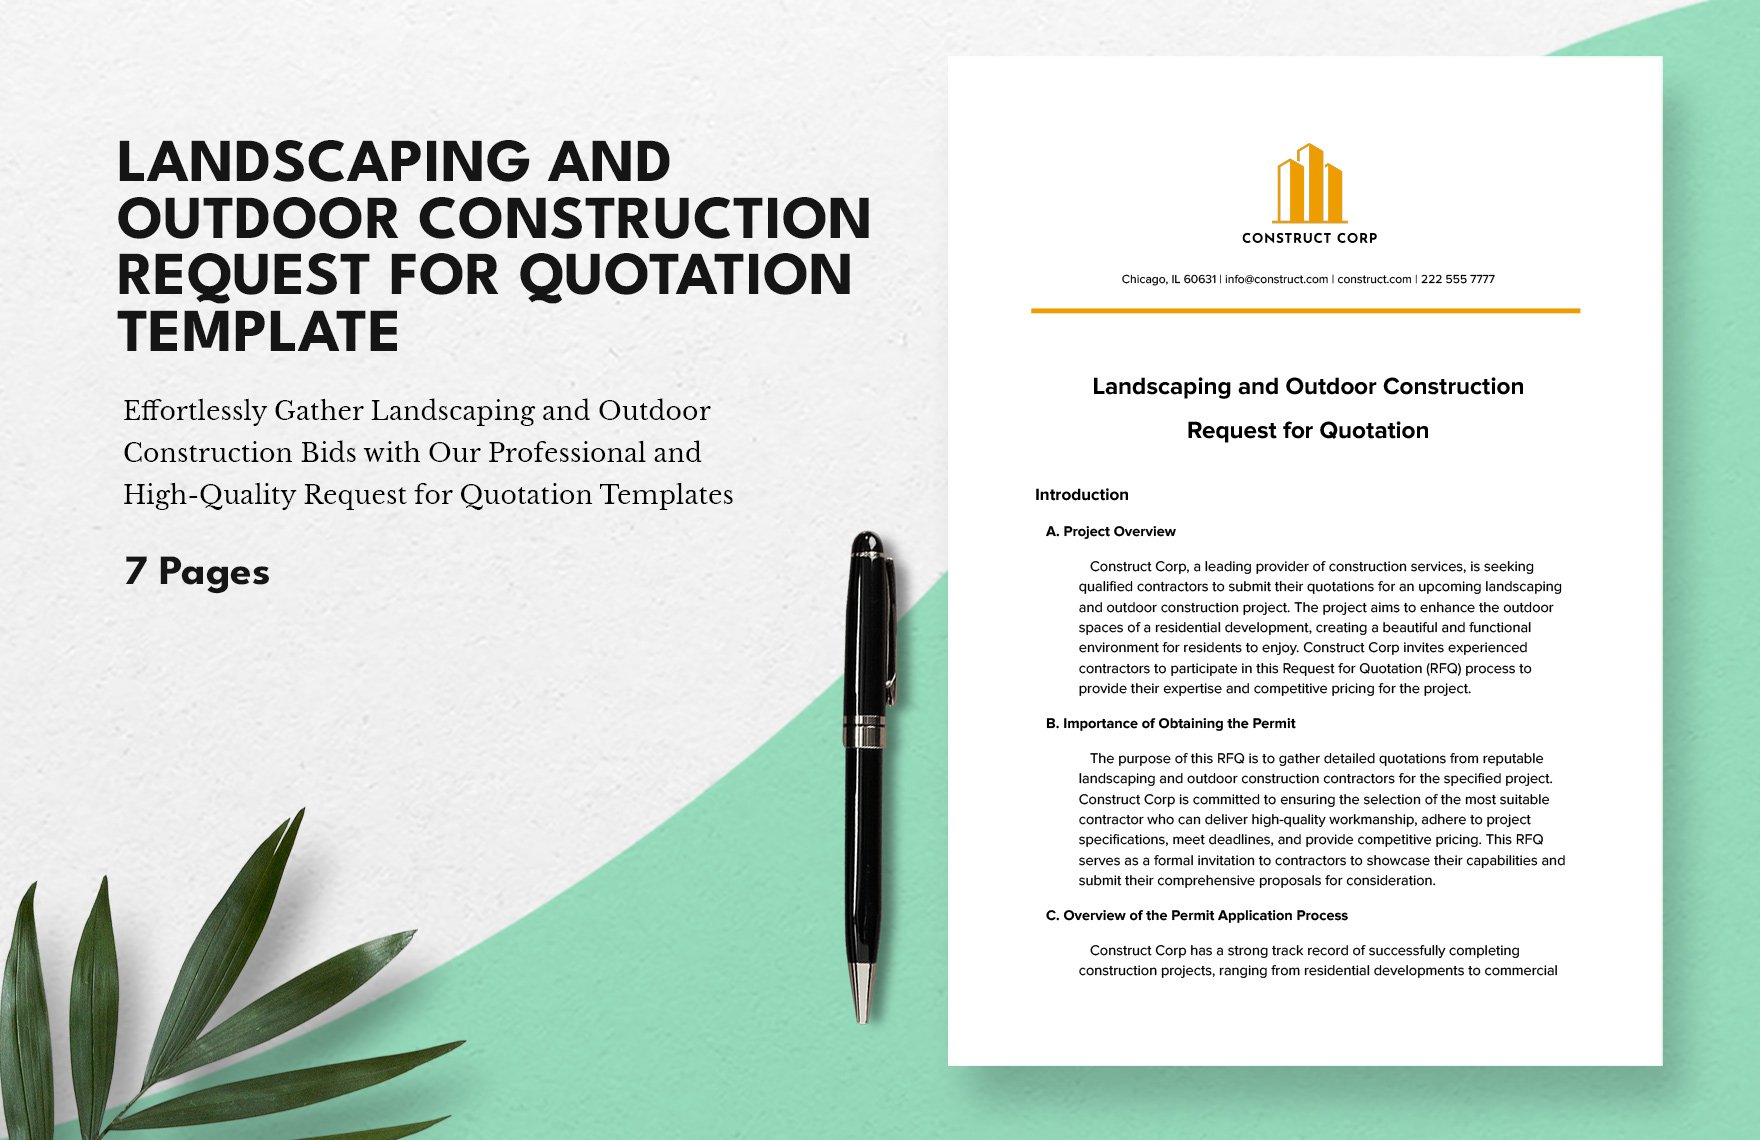 Landscaping and Outdoor Construction Request for Quotation Template 